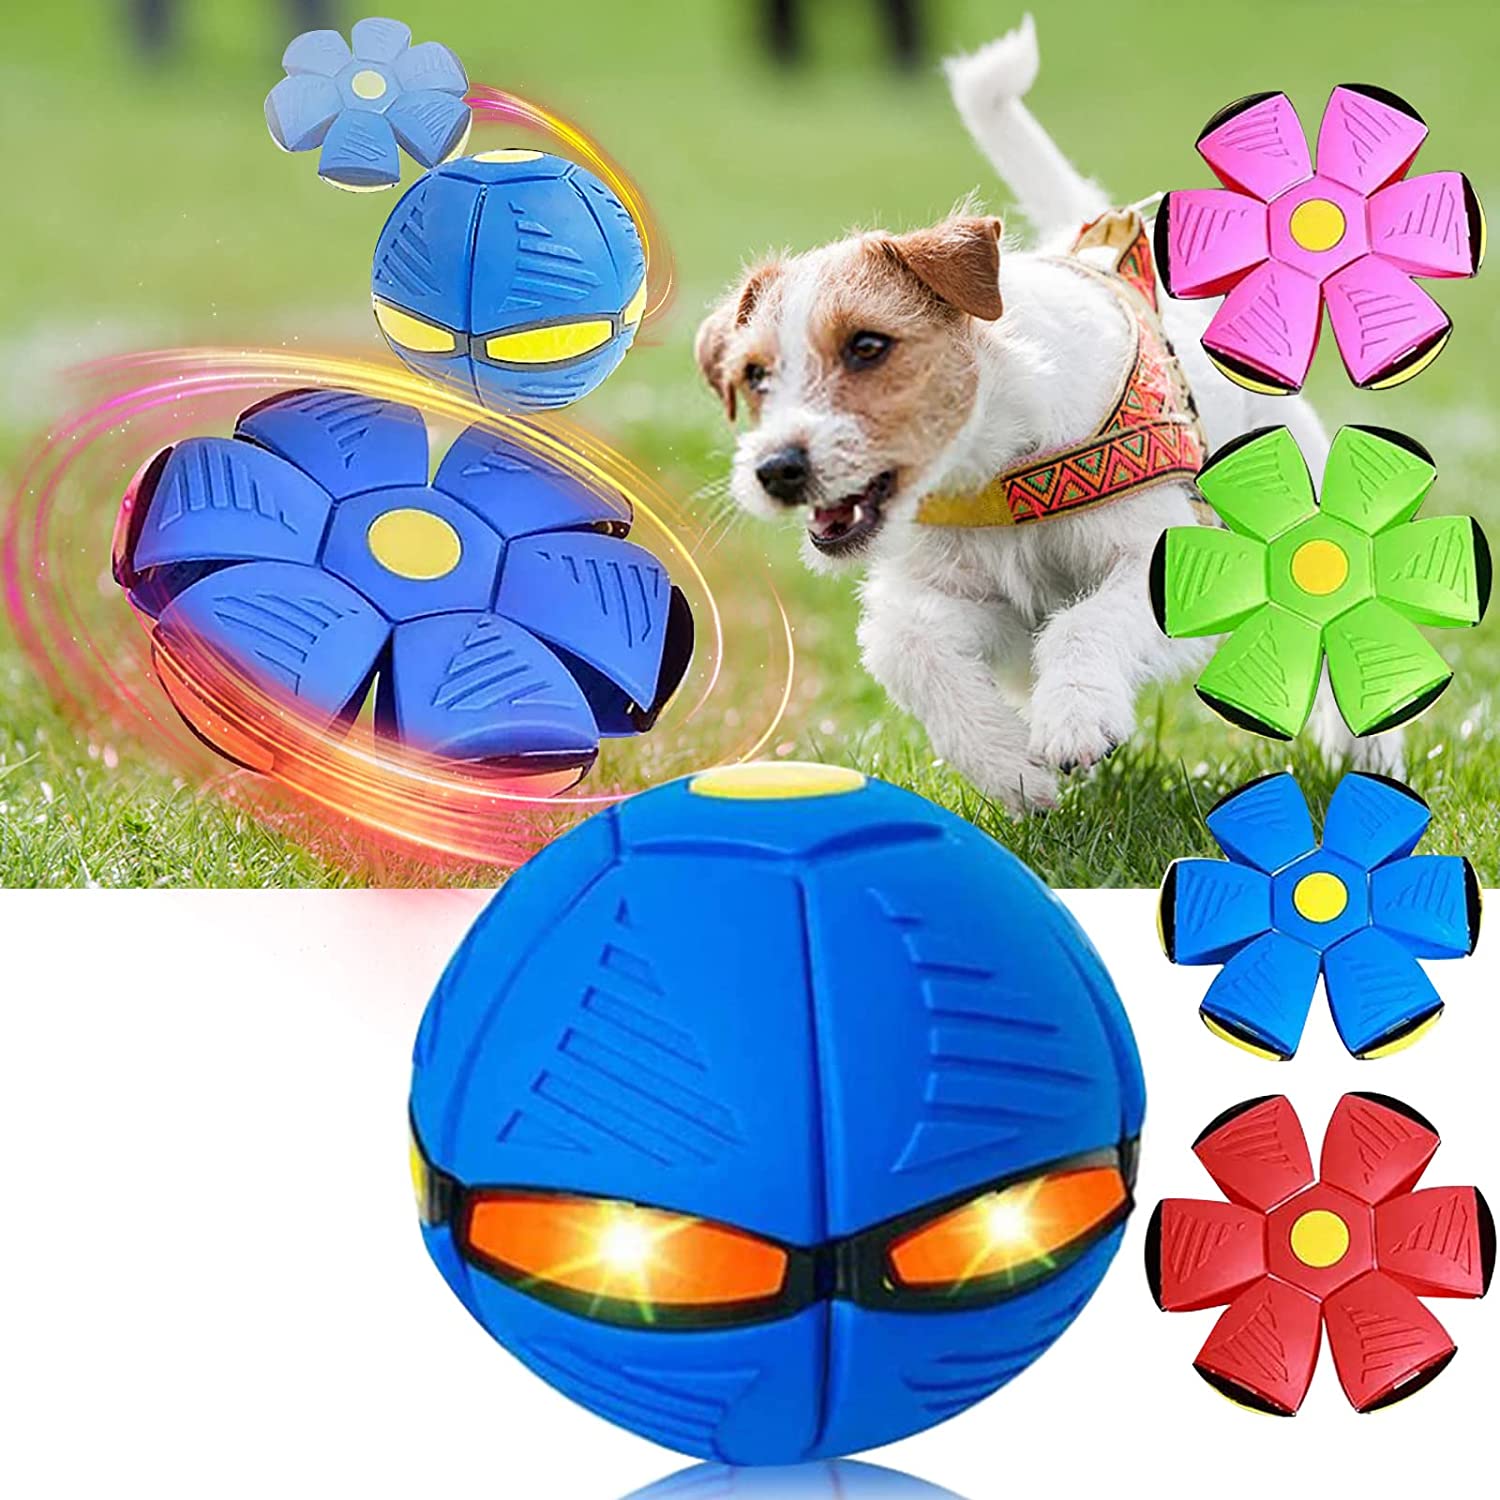 New Pet Dog Toy Magic Flying Saucer Ball Durable Soft Rubber Interactive